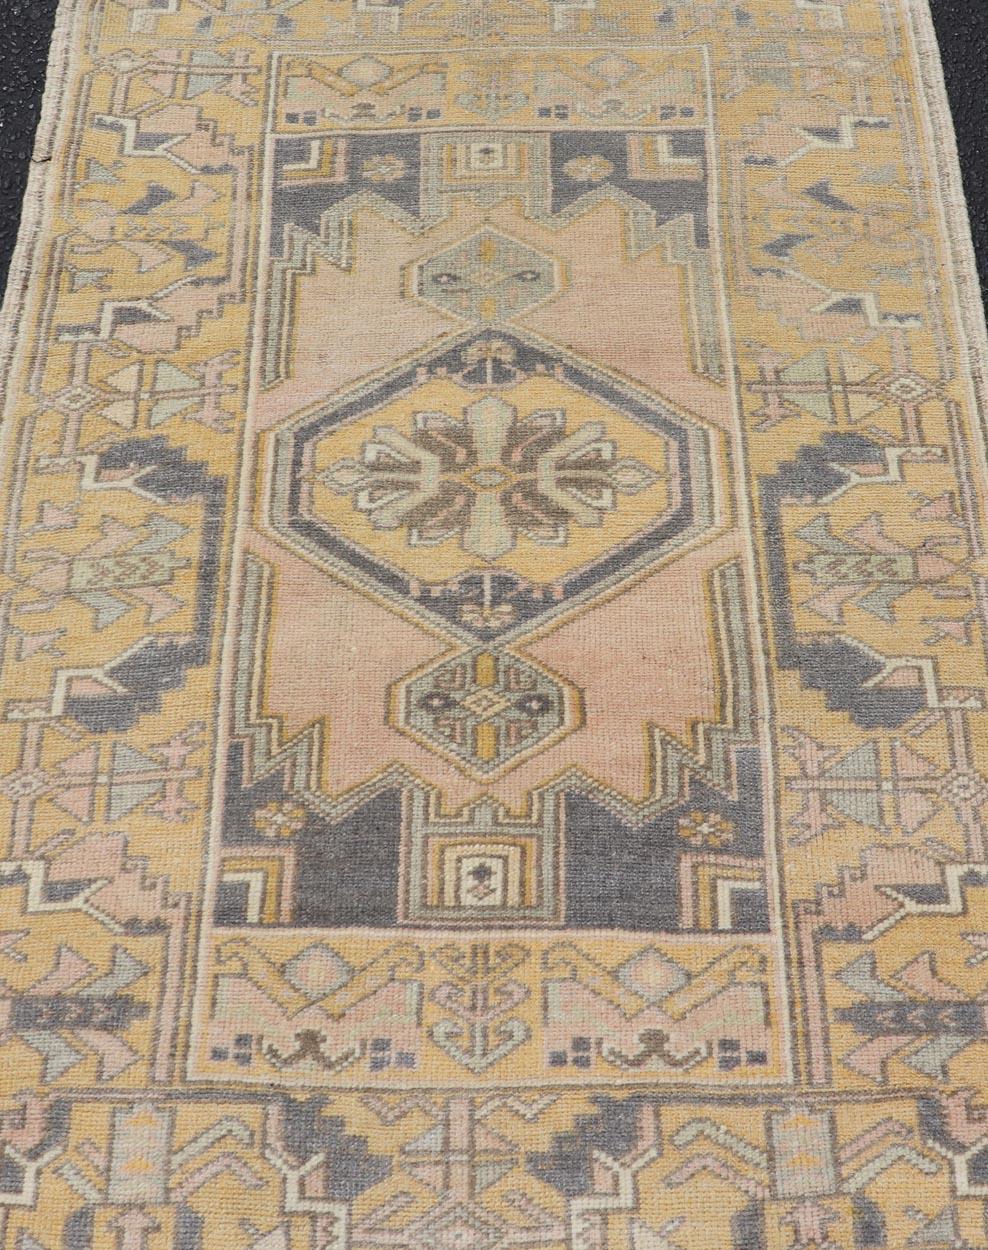 Vintage Oushak Rug from Turkey with Medallion Design in Yellow. Pink, Gray Blue. Rug/ EN-178905, country of origin / type: Turkey / Oushak, circa 1950.

Measures: 2'9 x 3'10 

Vintage Oushak Rug from Turkey